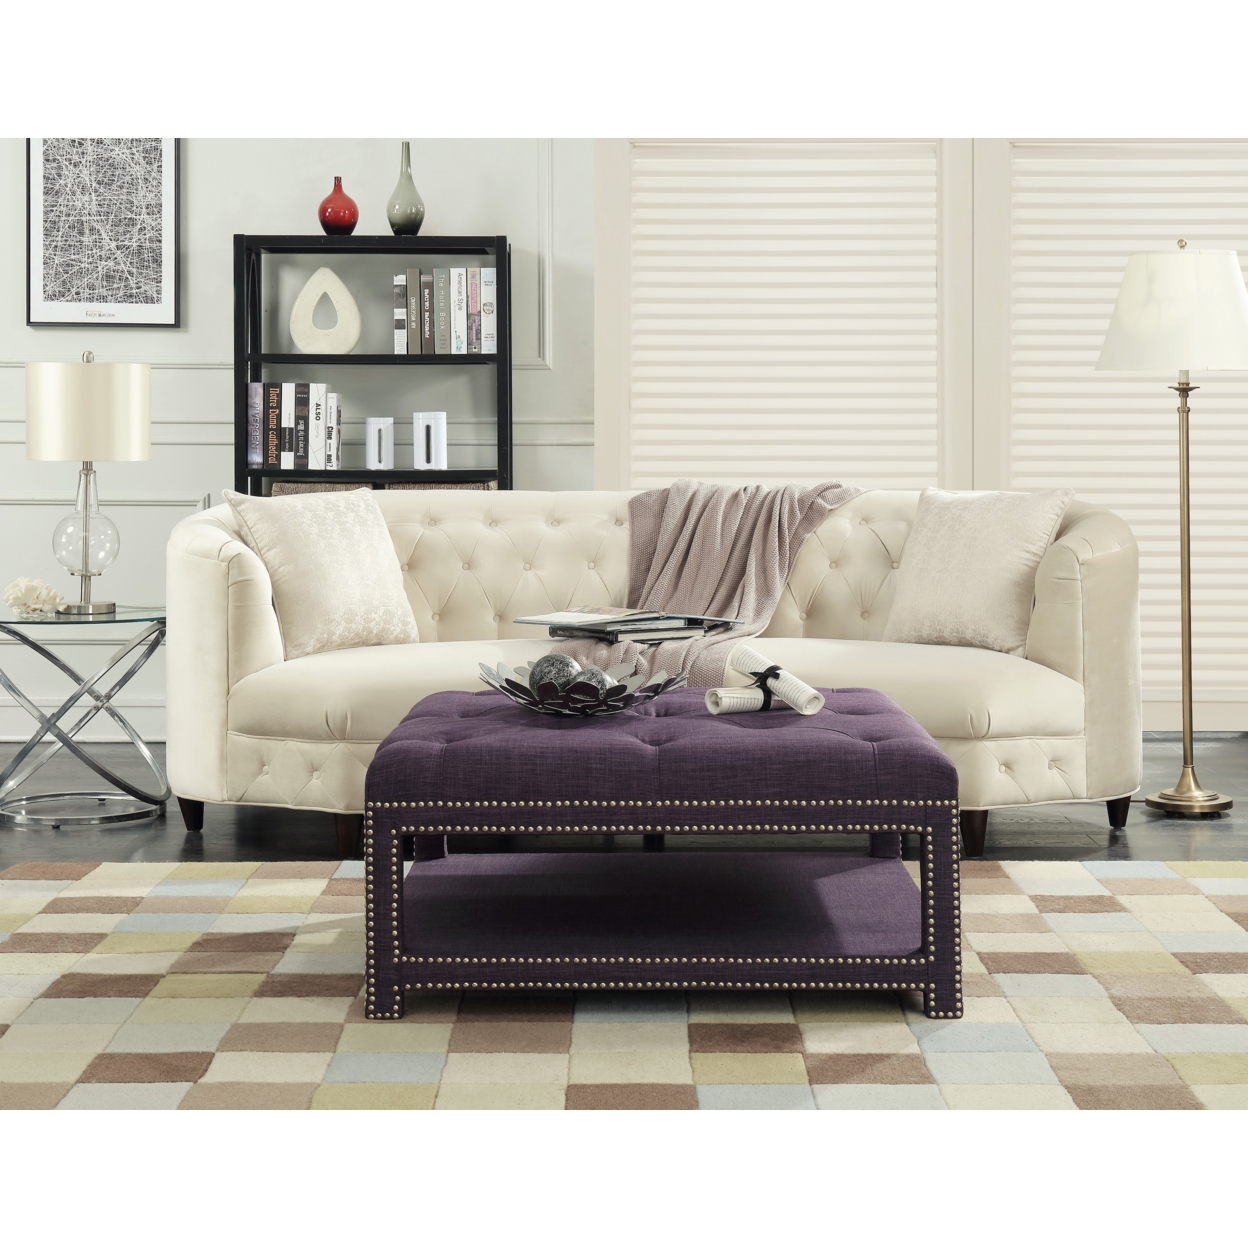 Quinn Coffee Table Ottoman 2-Layer Polished Nailhead Tufted Linen Bench - Purple